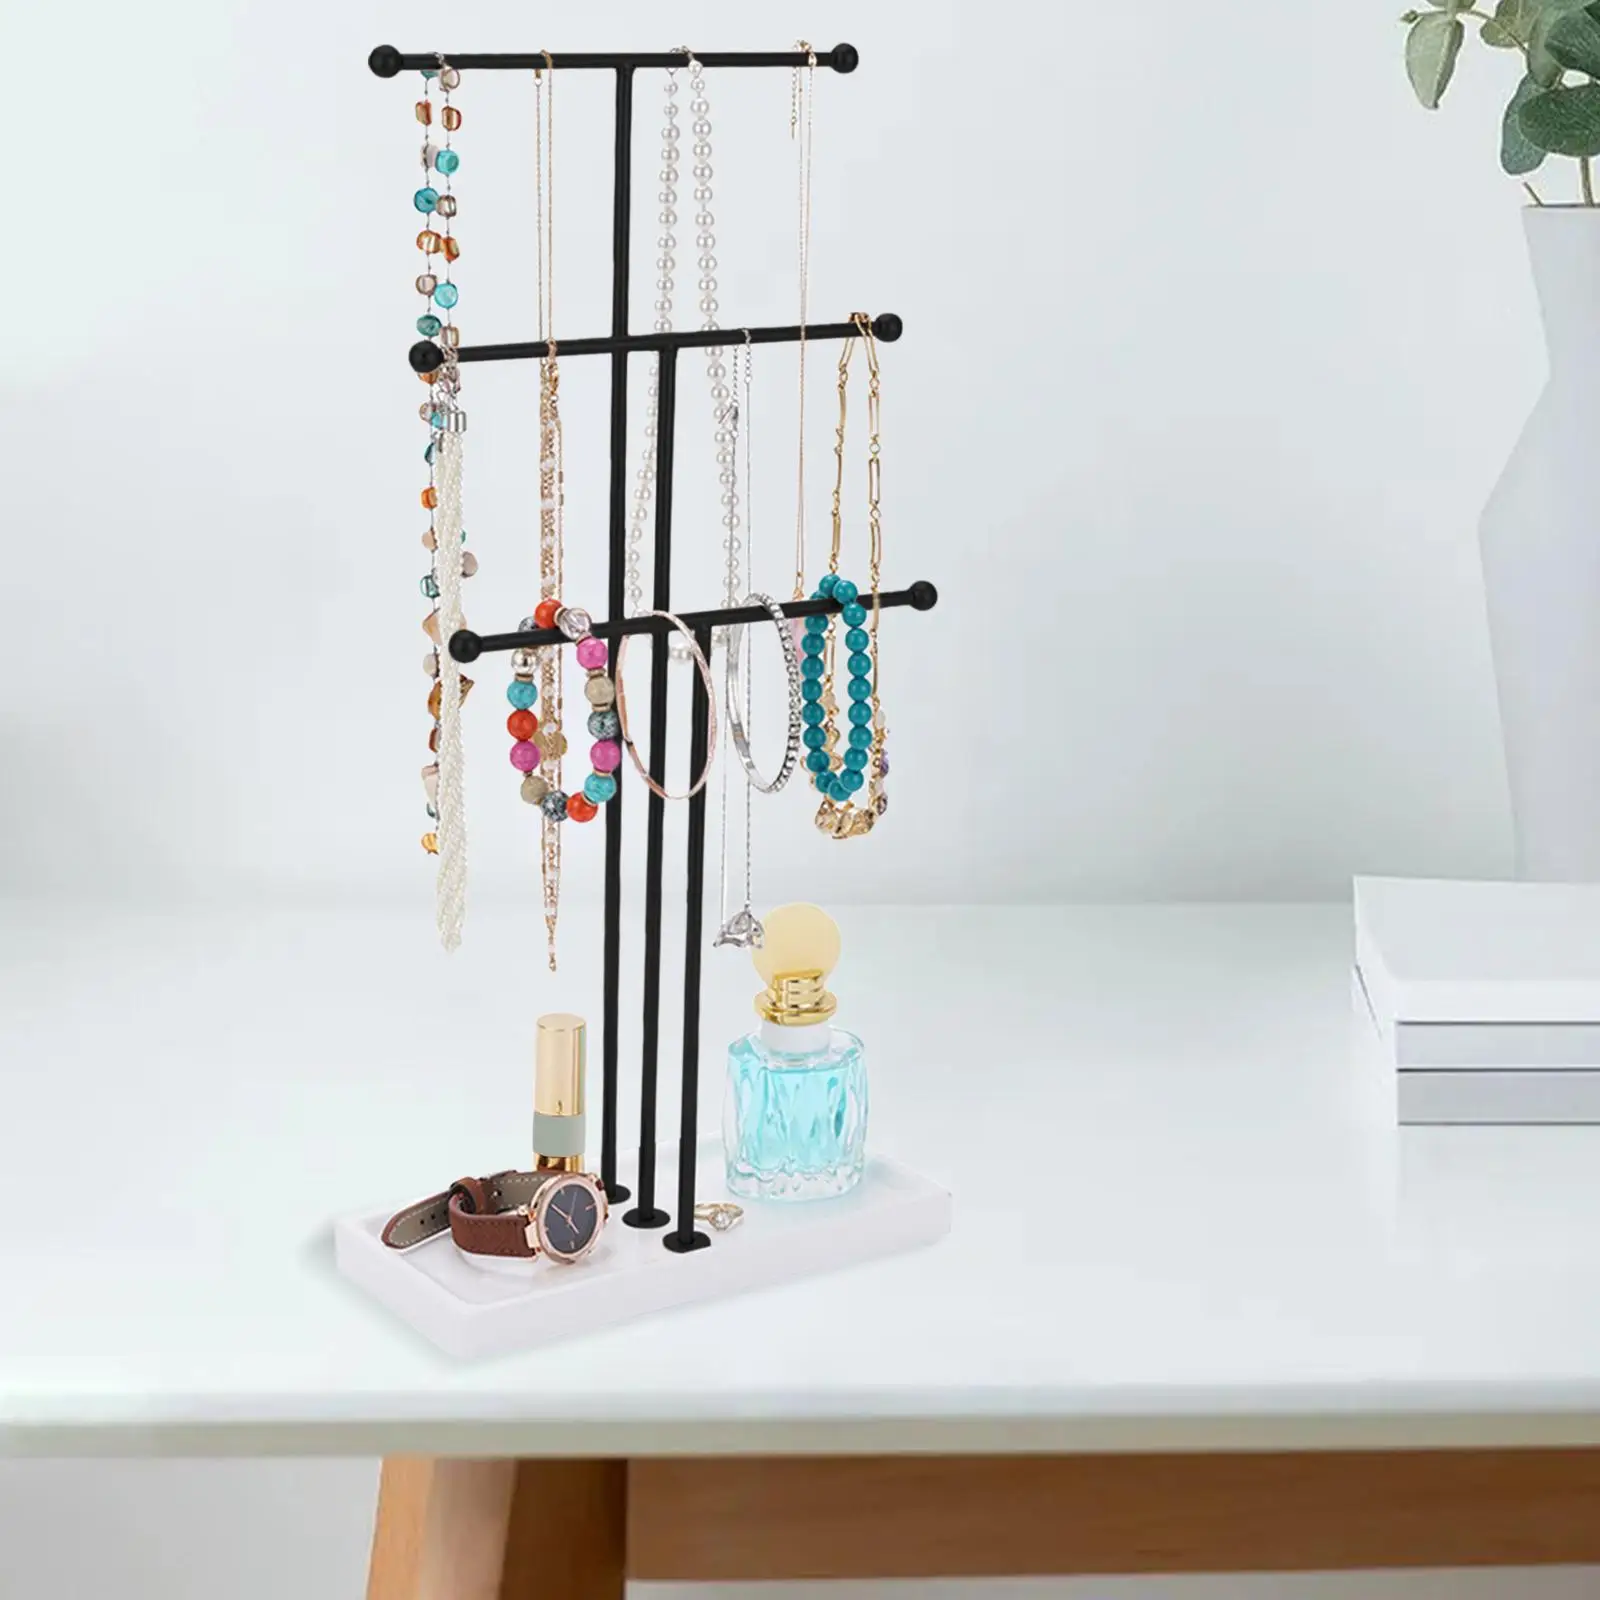 3 Layer T Bar Jewelry Display Rack with Tray Women Desktop Jewelry Stand Organizer for Necklace Home Shop Decor Bangle Holder